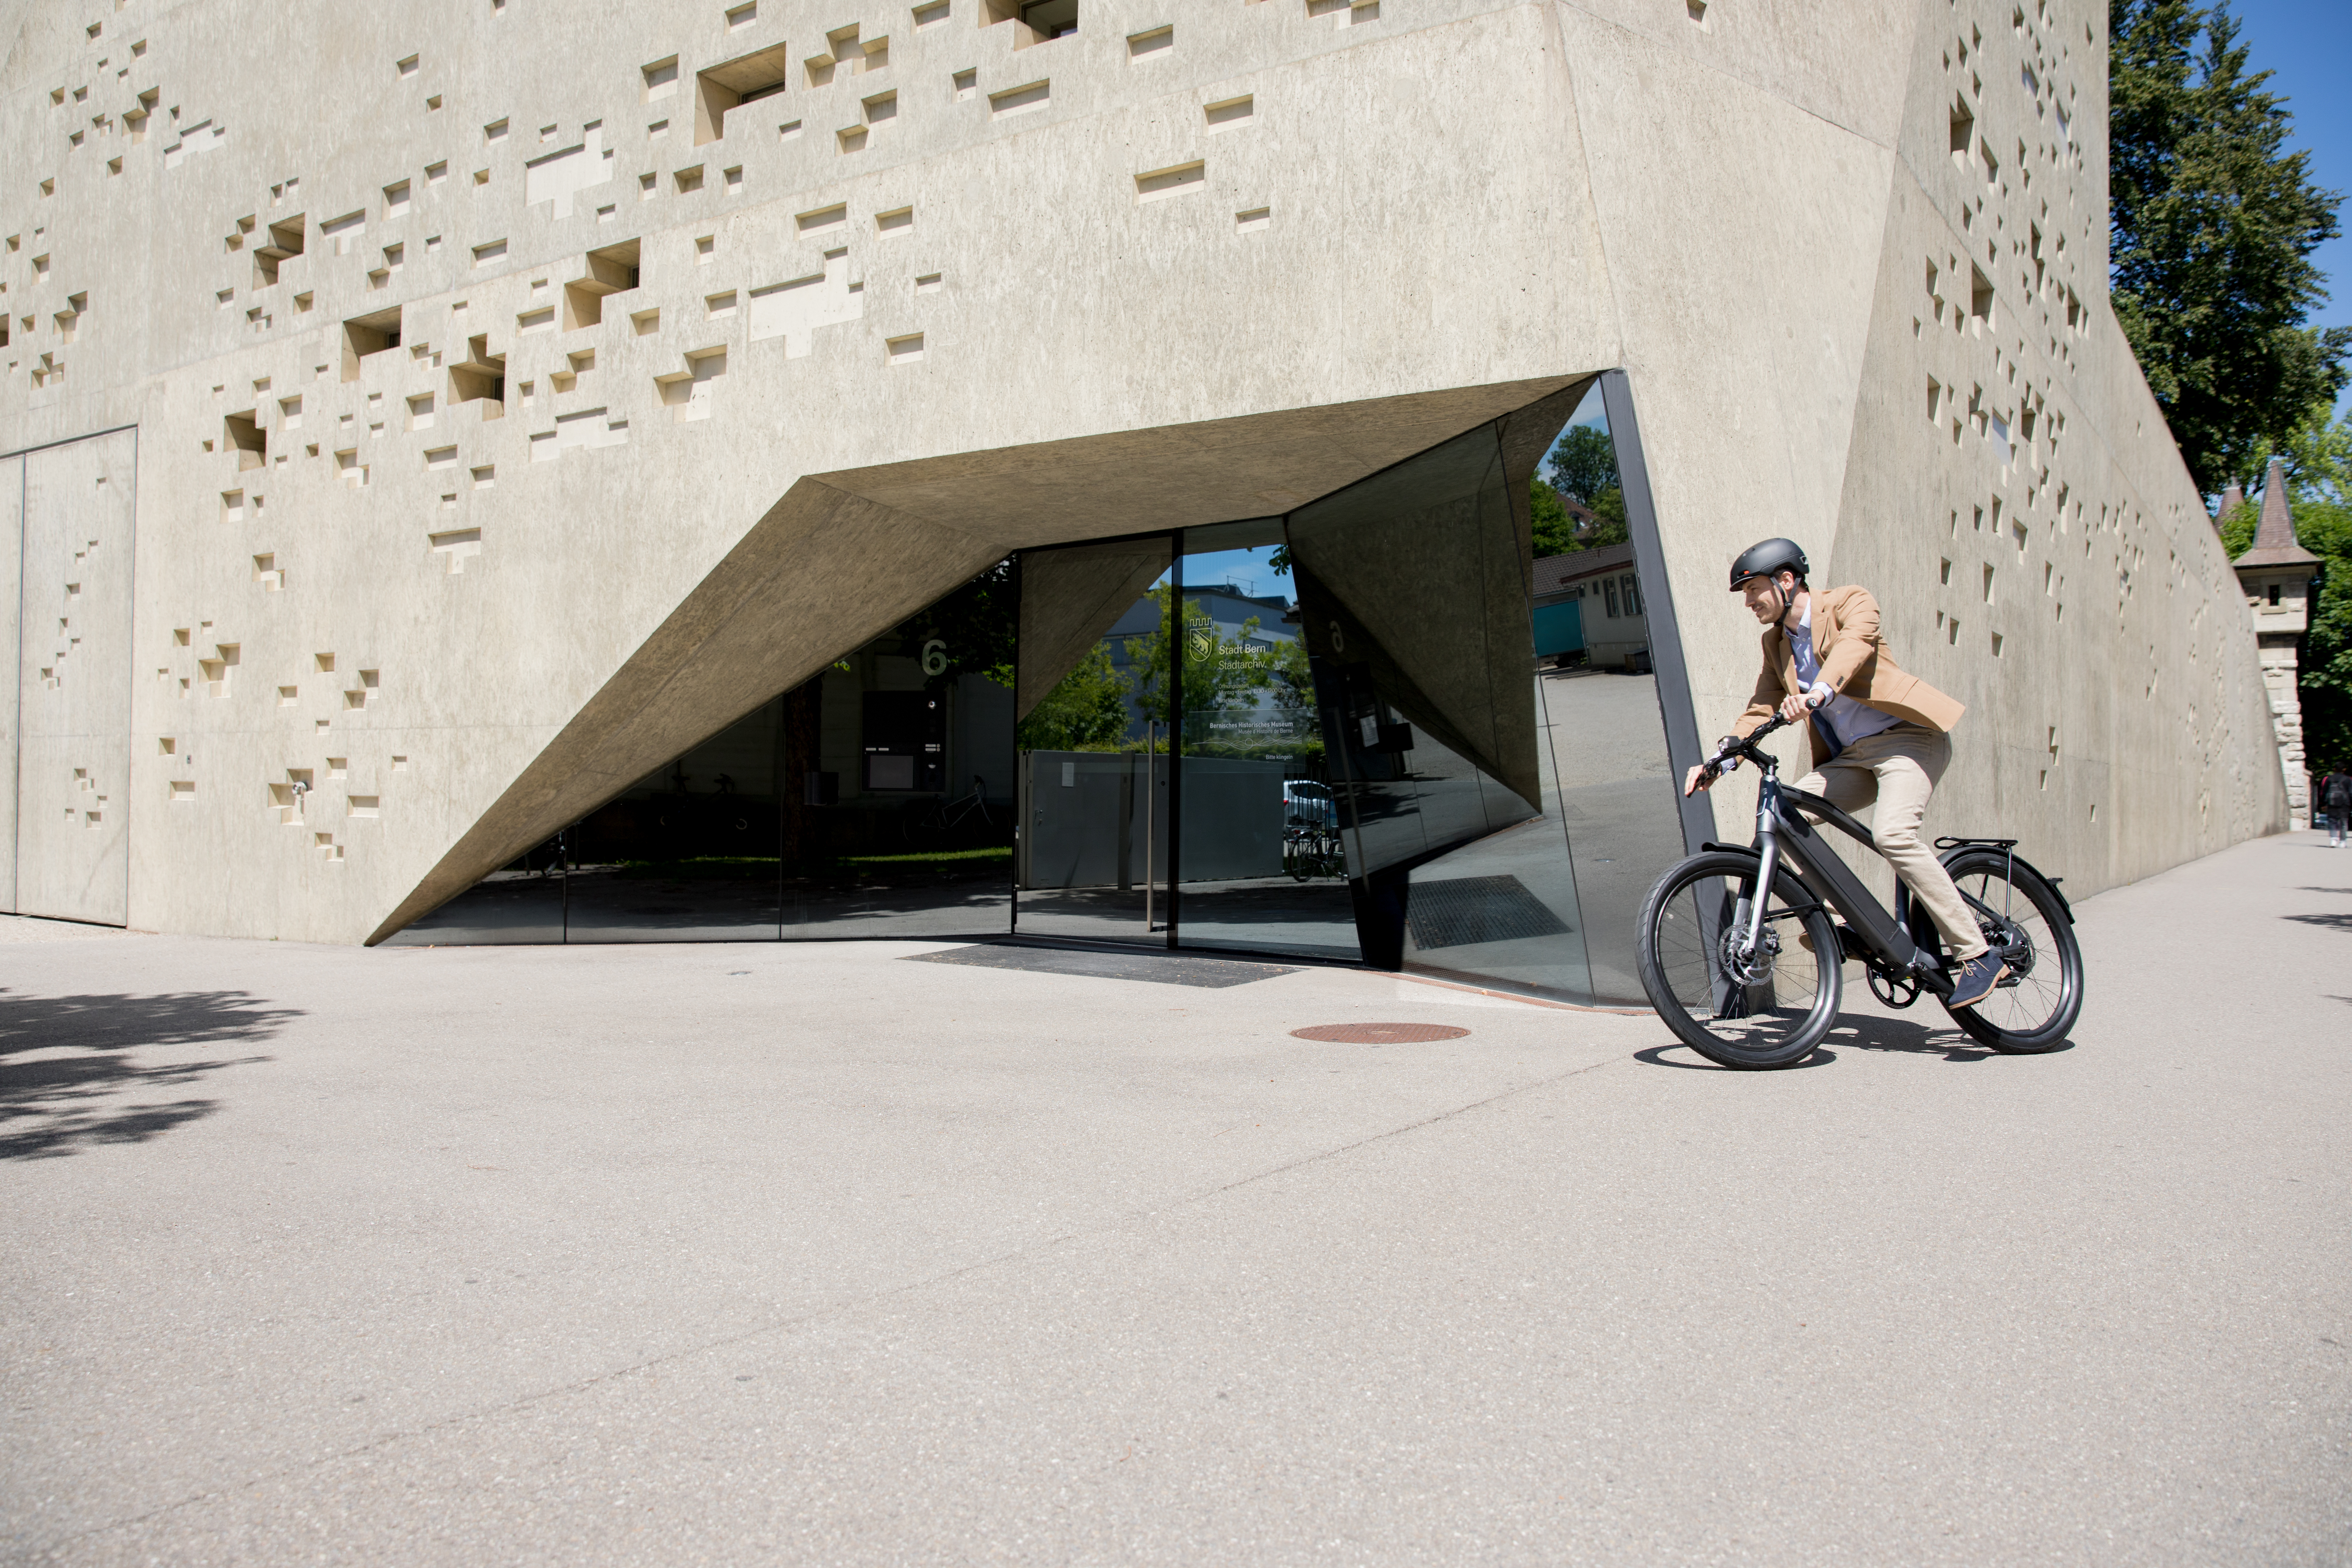 Stromer and Arval are launching full-service leasing for fast e-bikes: Man riding a leased Stromer ST2 to work.